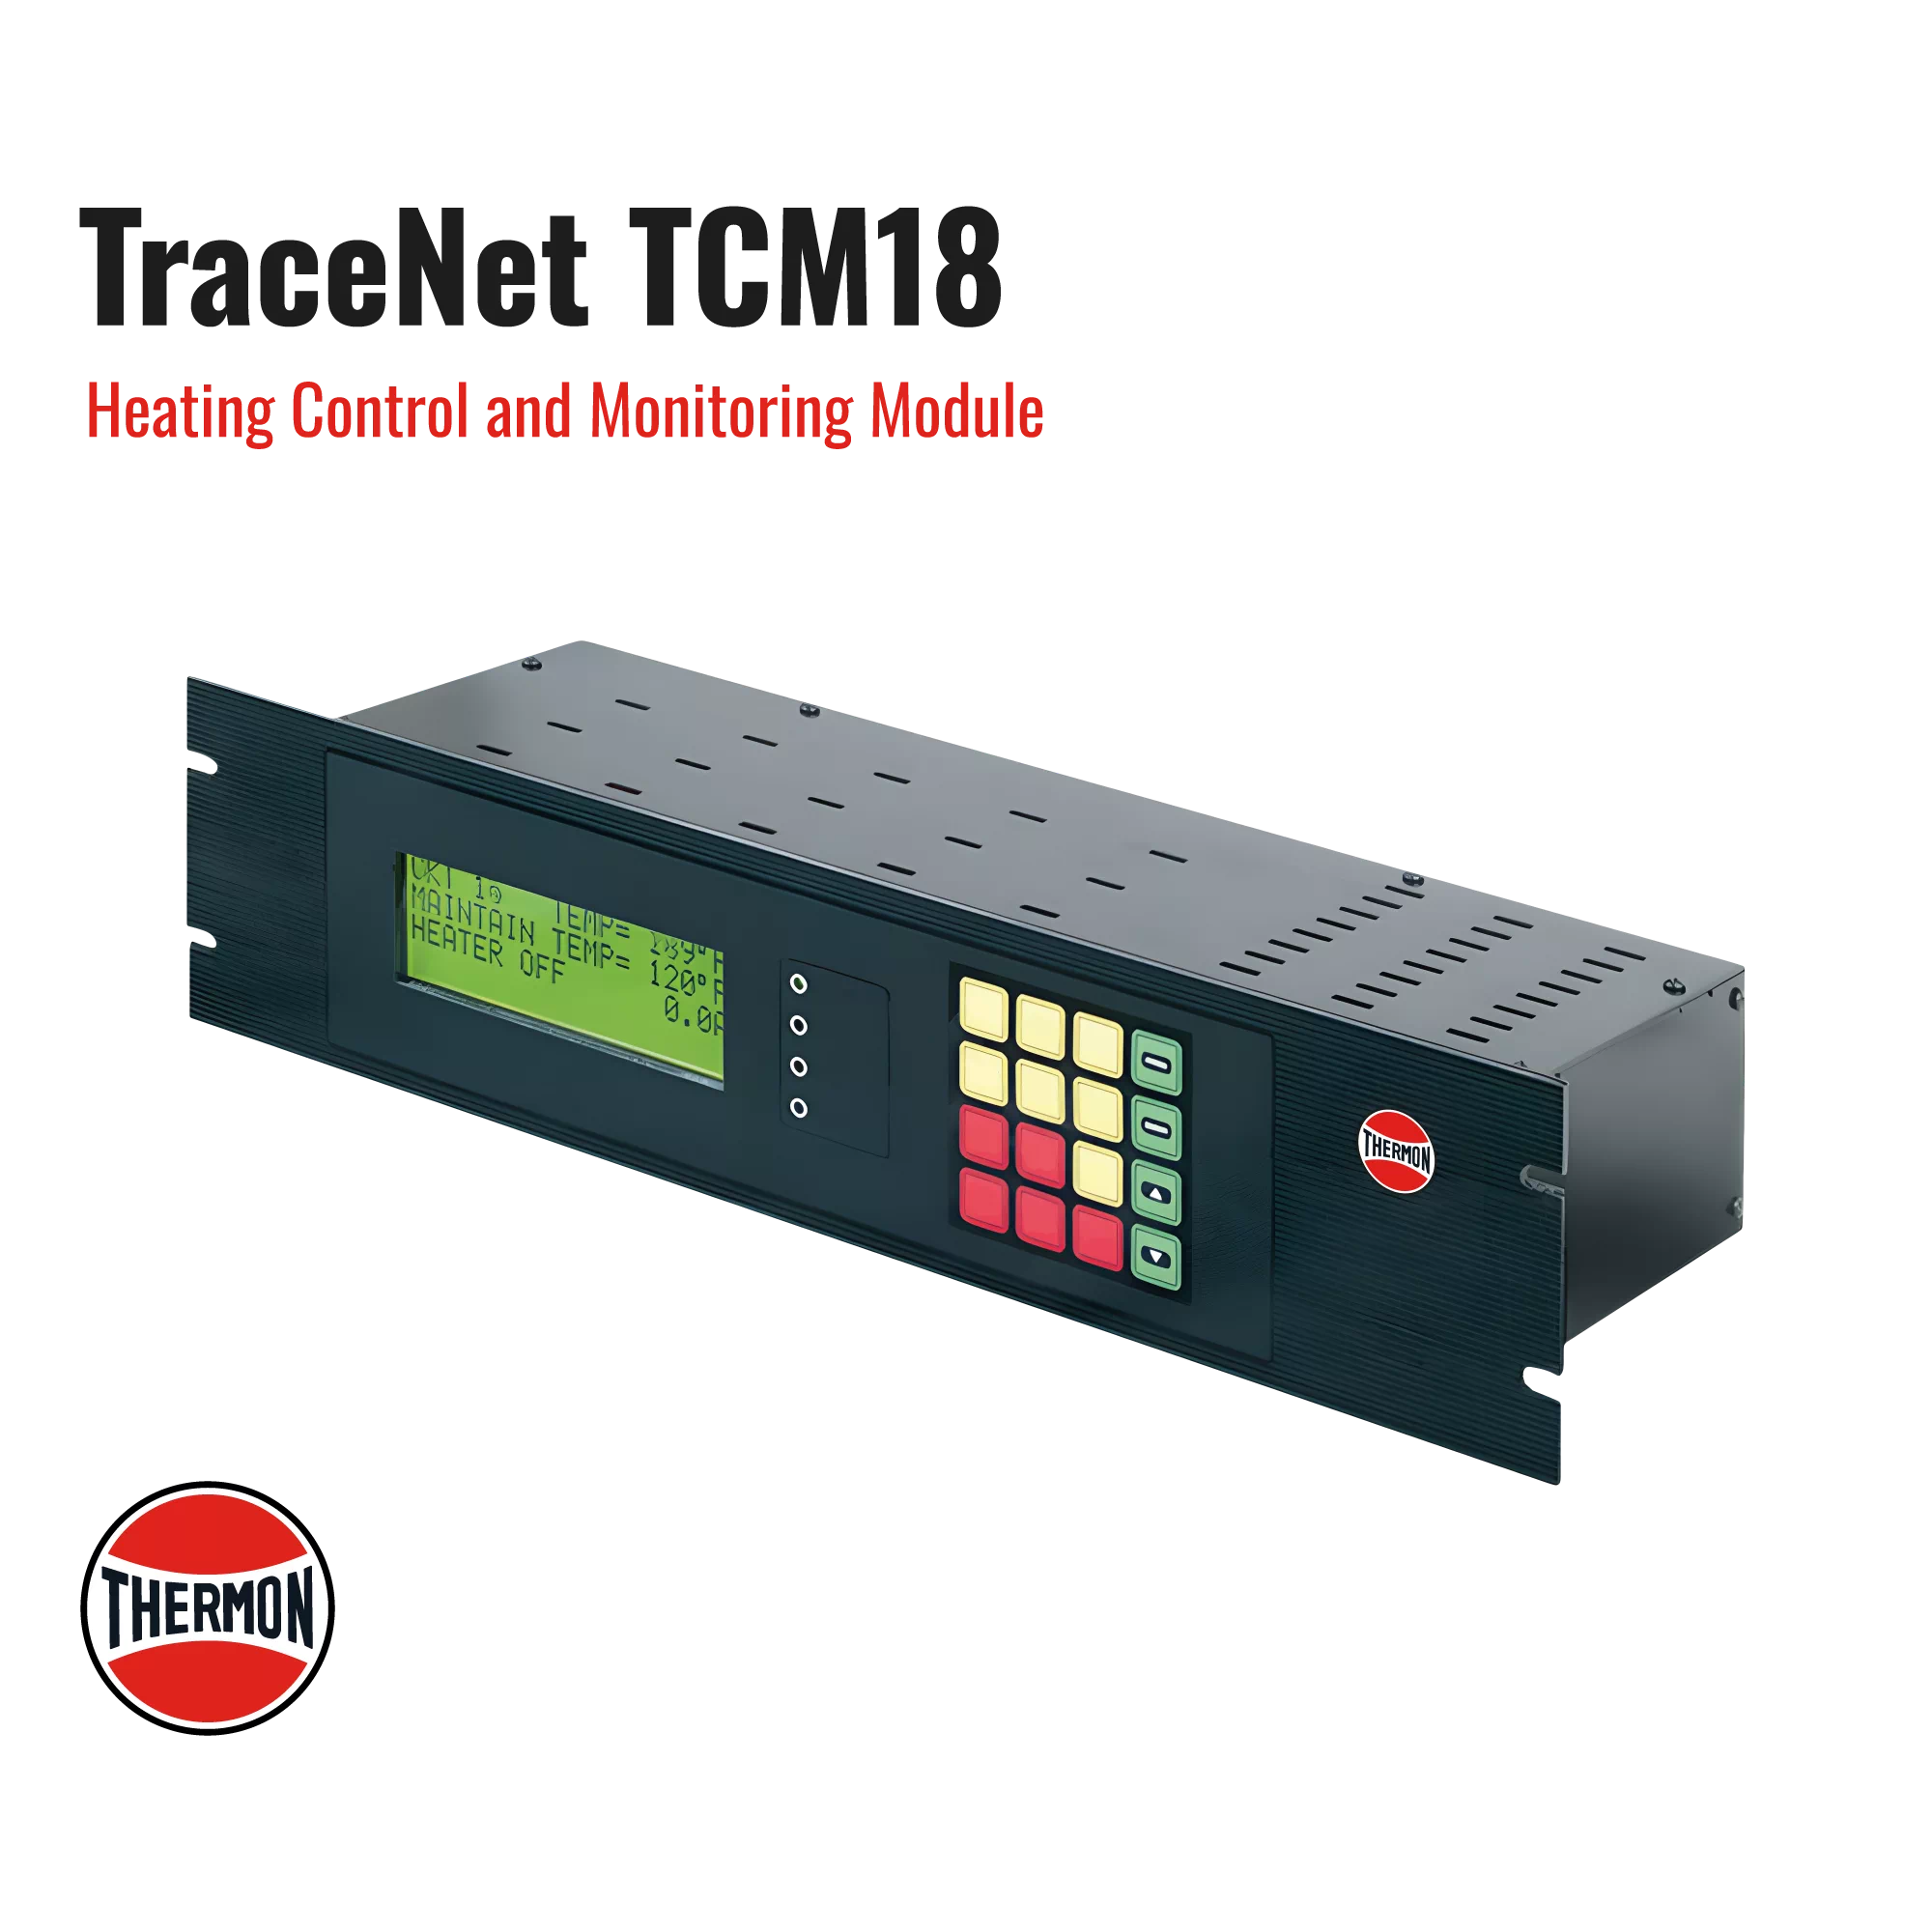 Thermon-TraceNet-TCM18-Industrial-Heating-Heat-Tracing-Systems